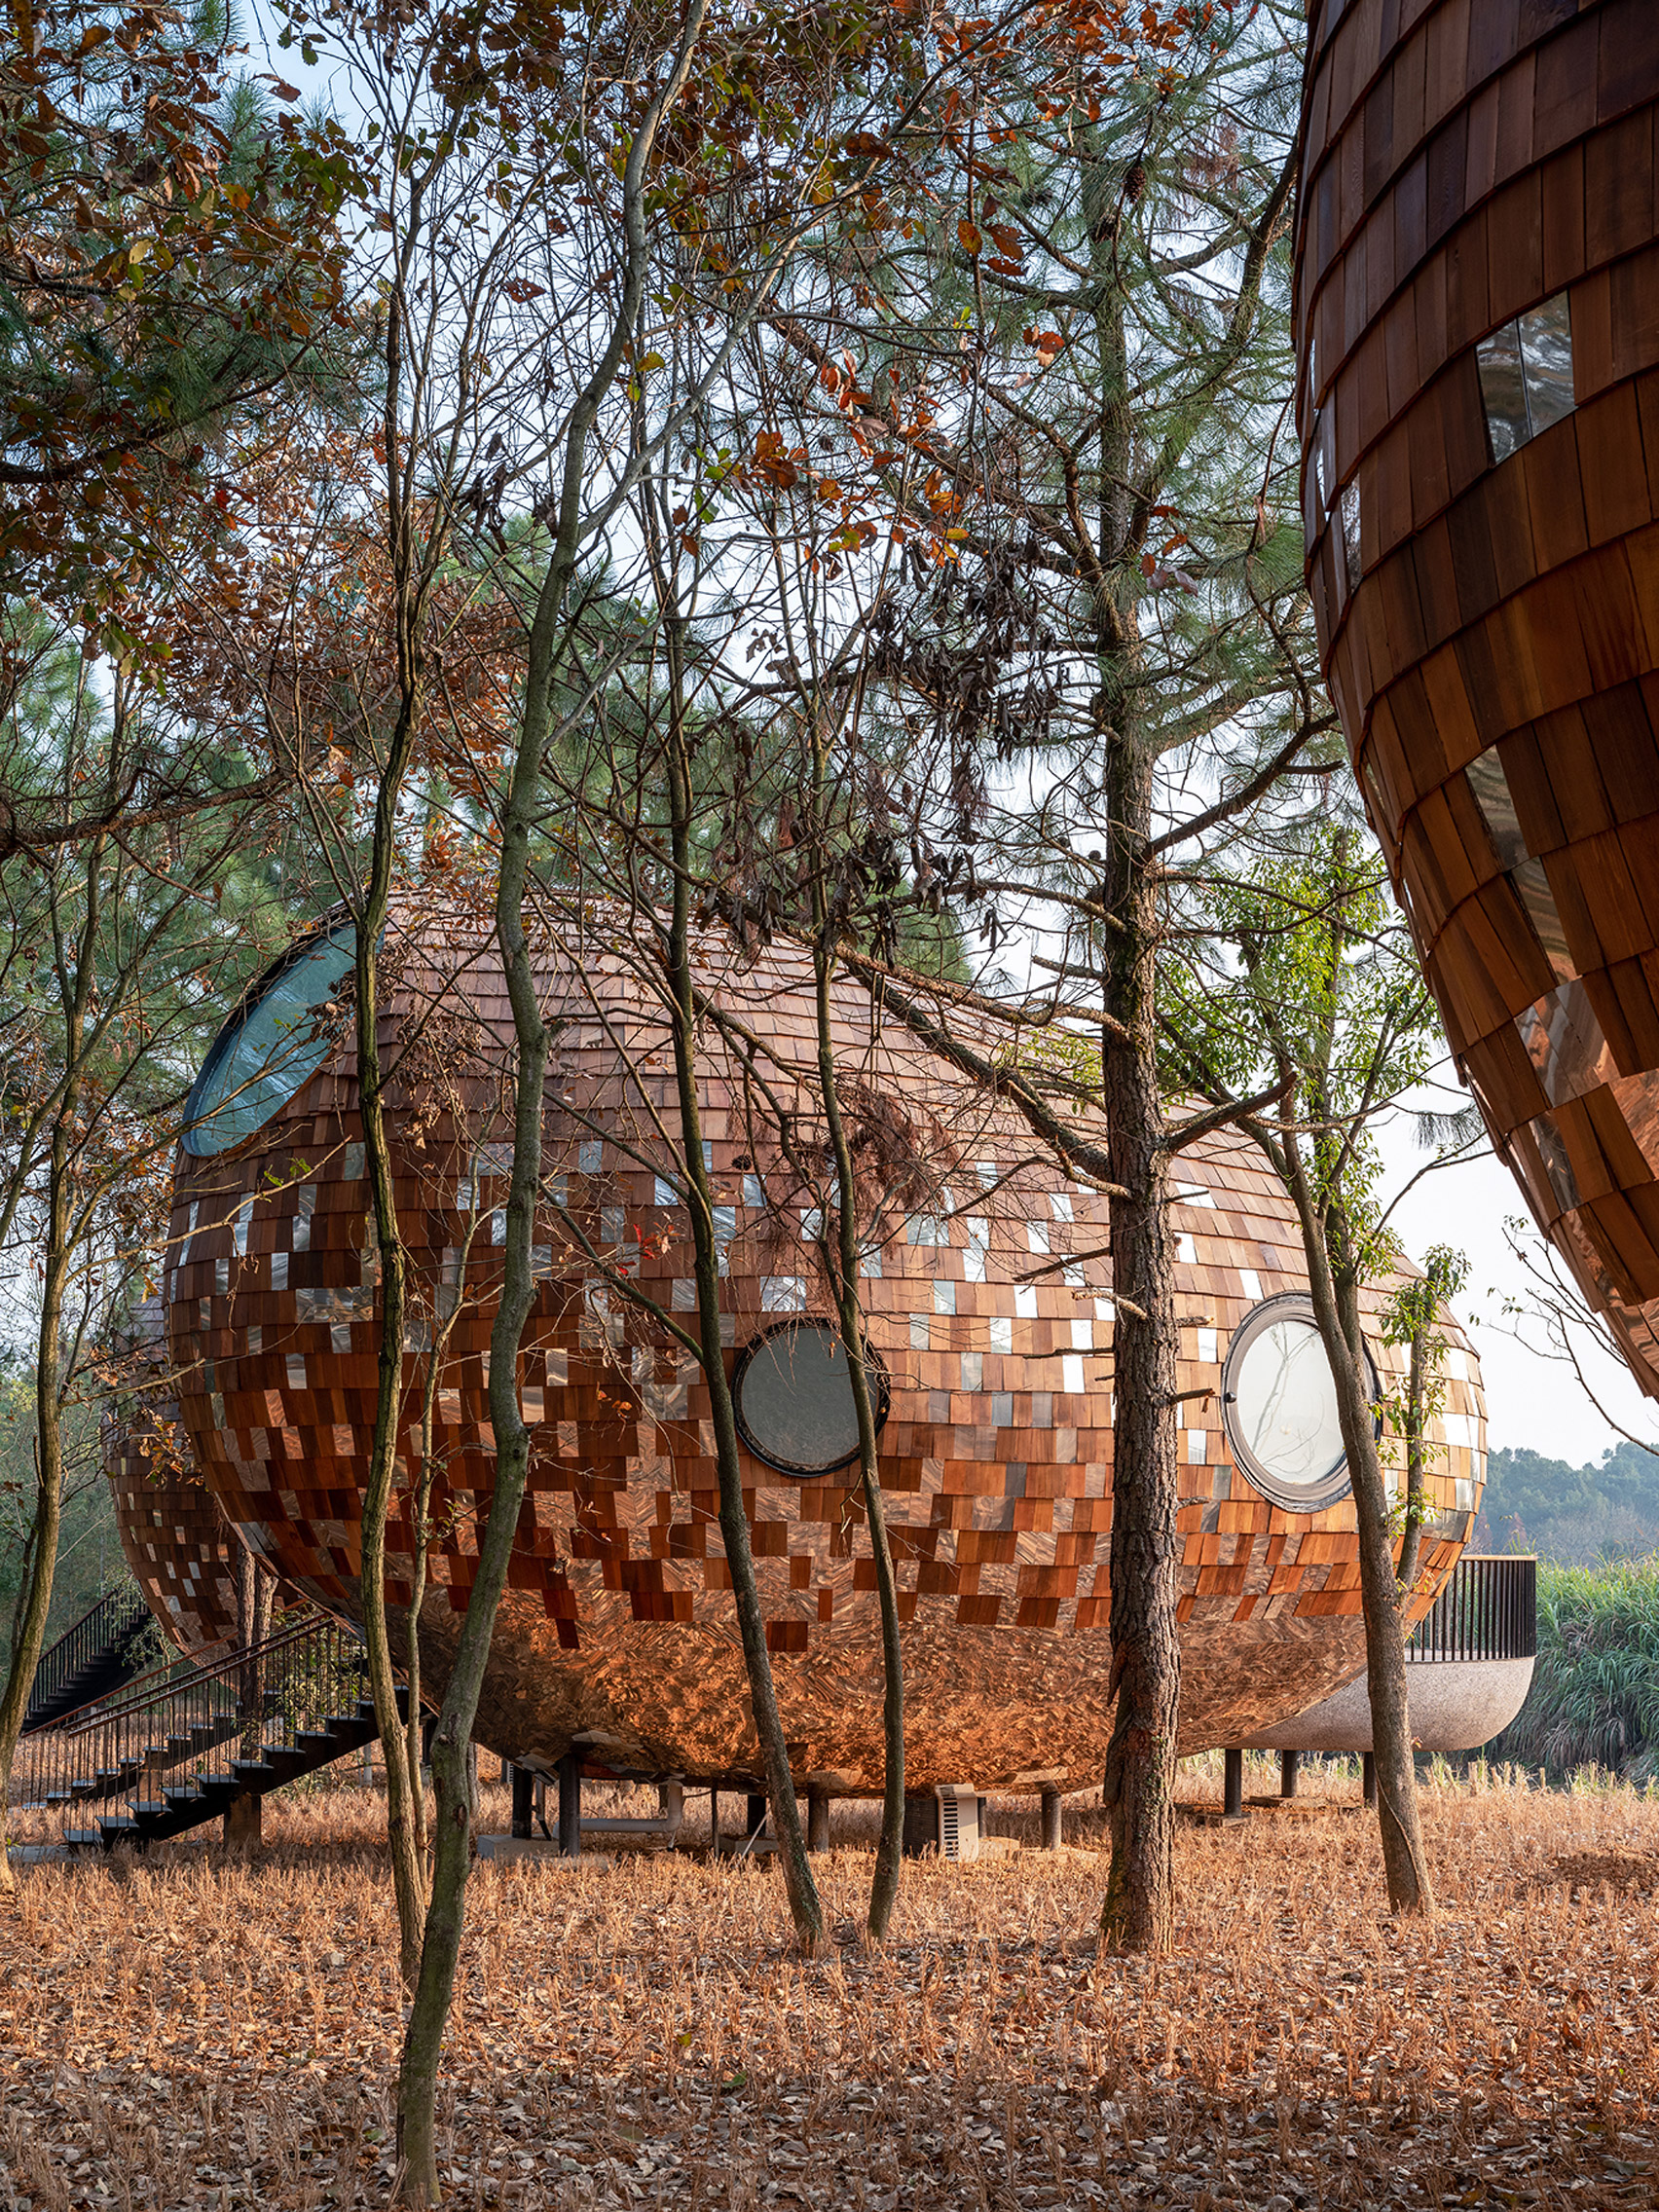 An woodland cabin clad in shingles and mirrors